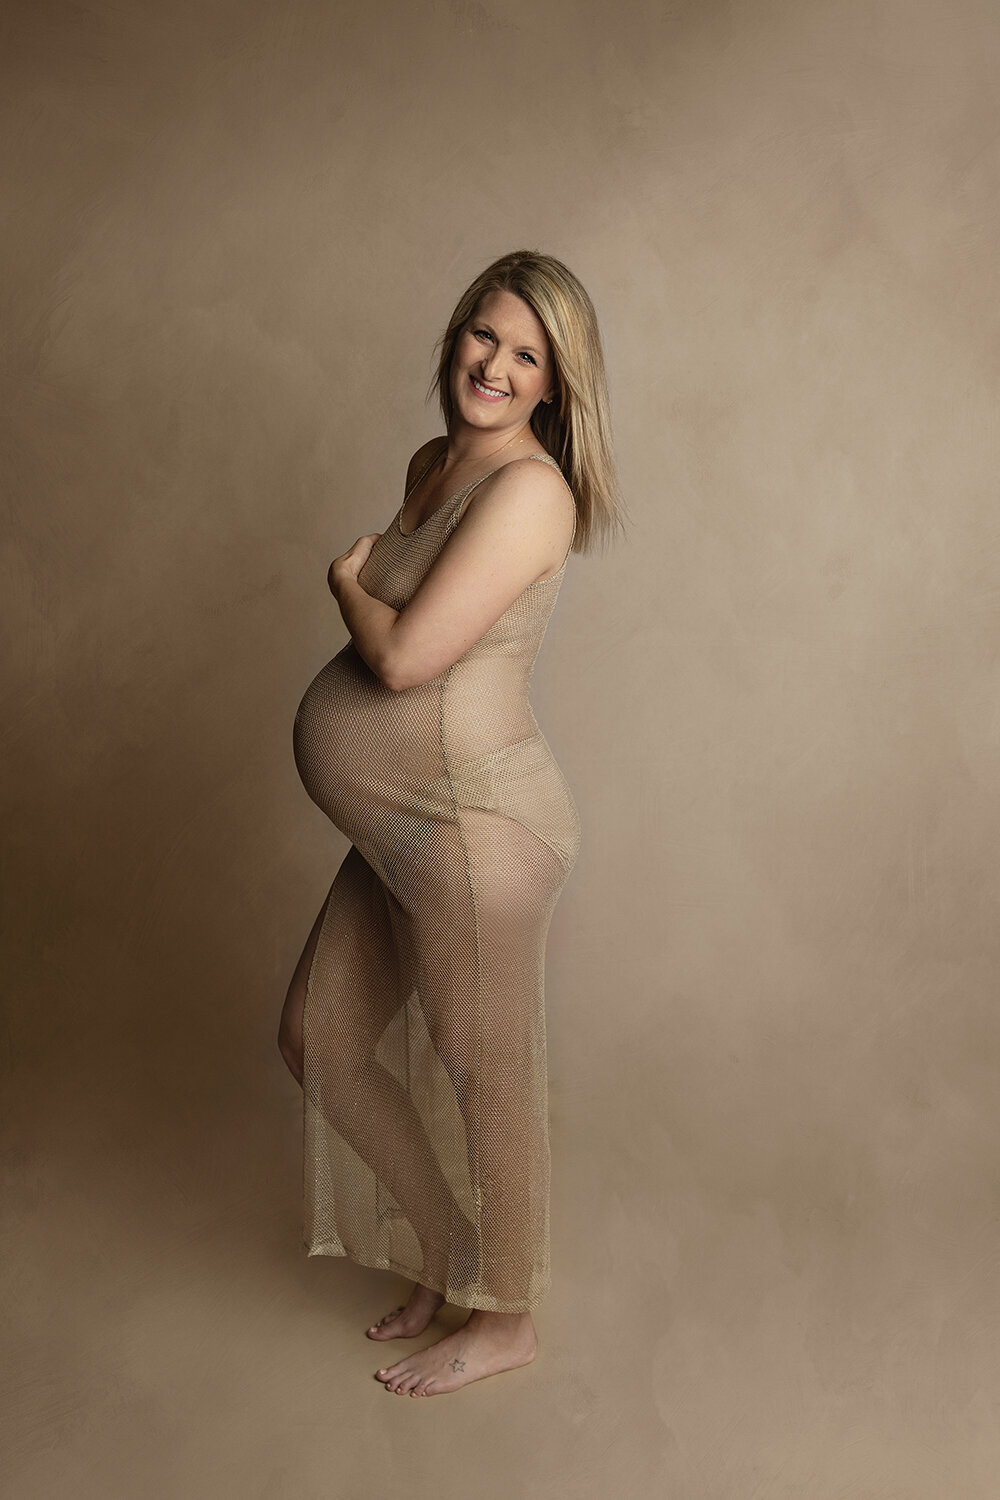 New-Orleans-maternity-photographer-13